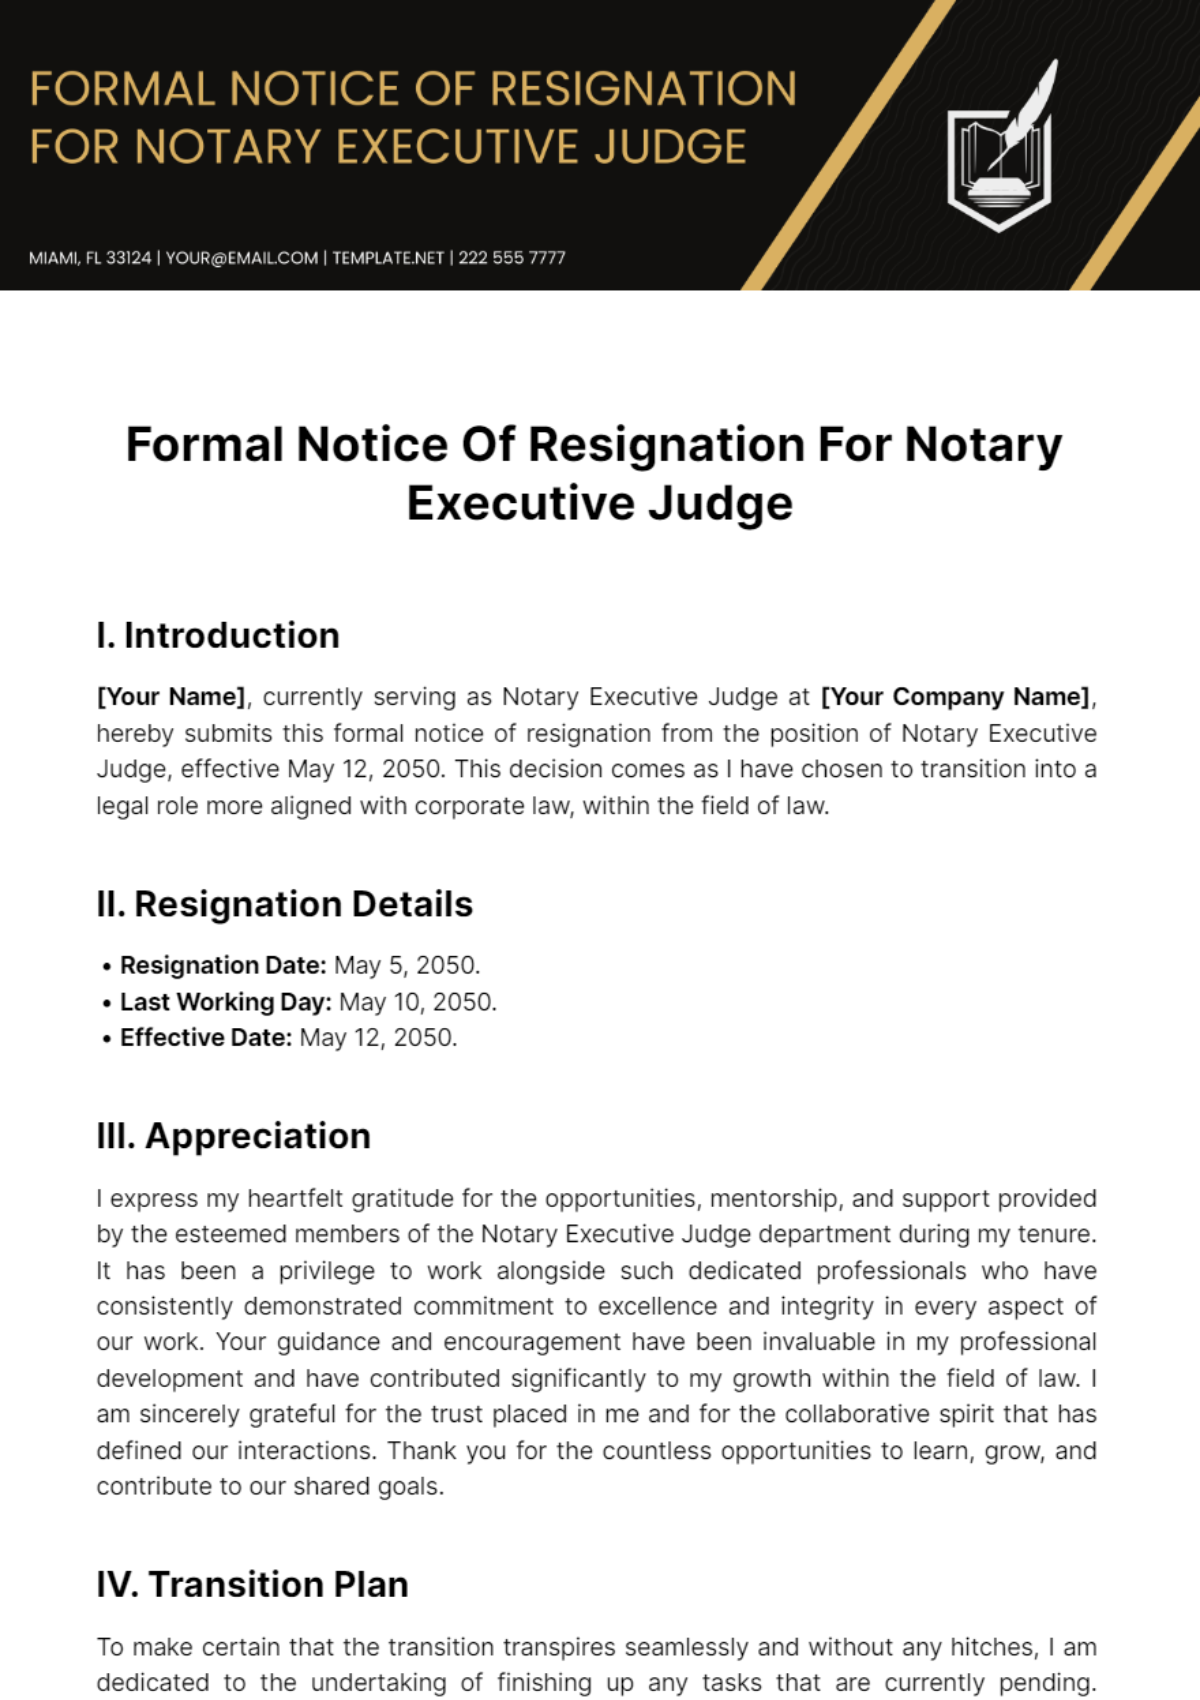 Free Formal Notice Of Resignation For Notary Executive Judge Template